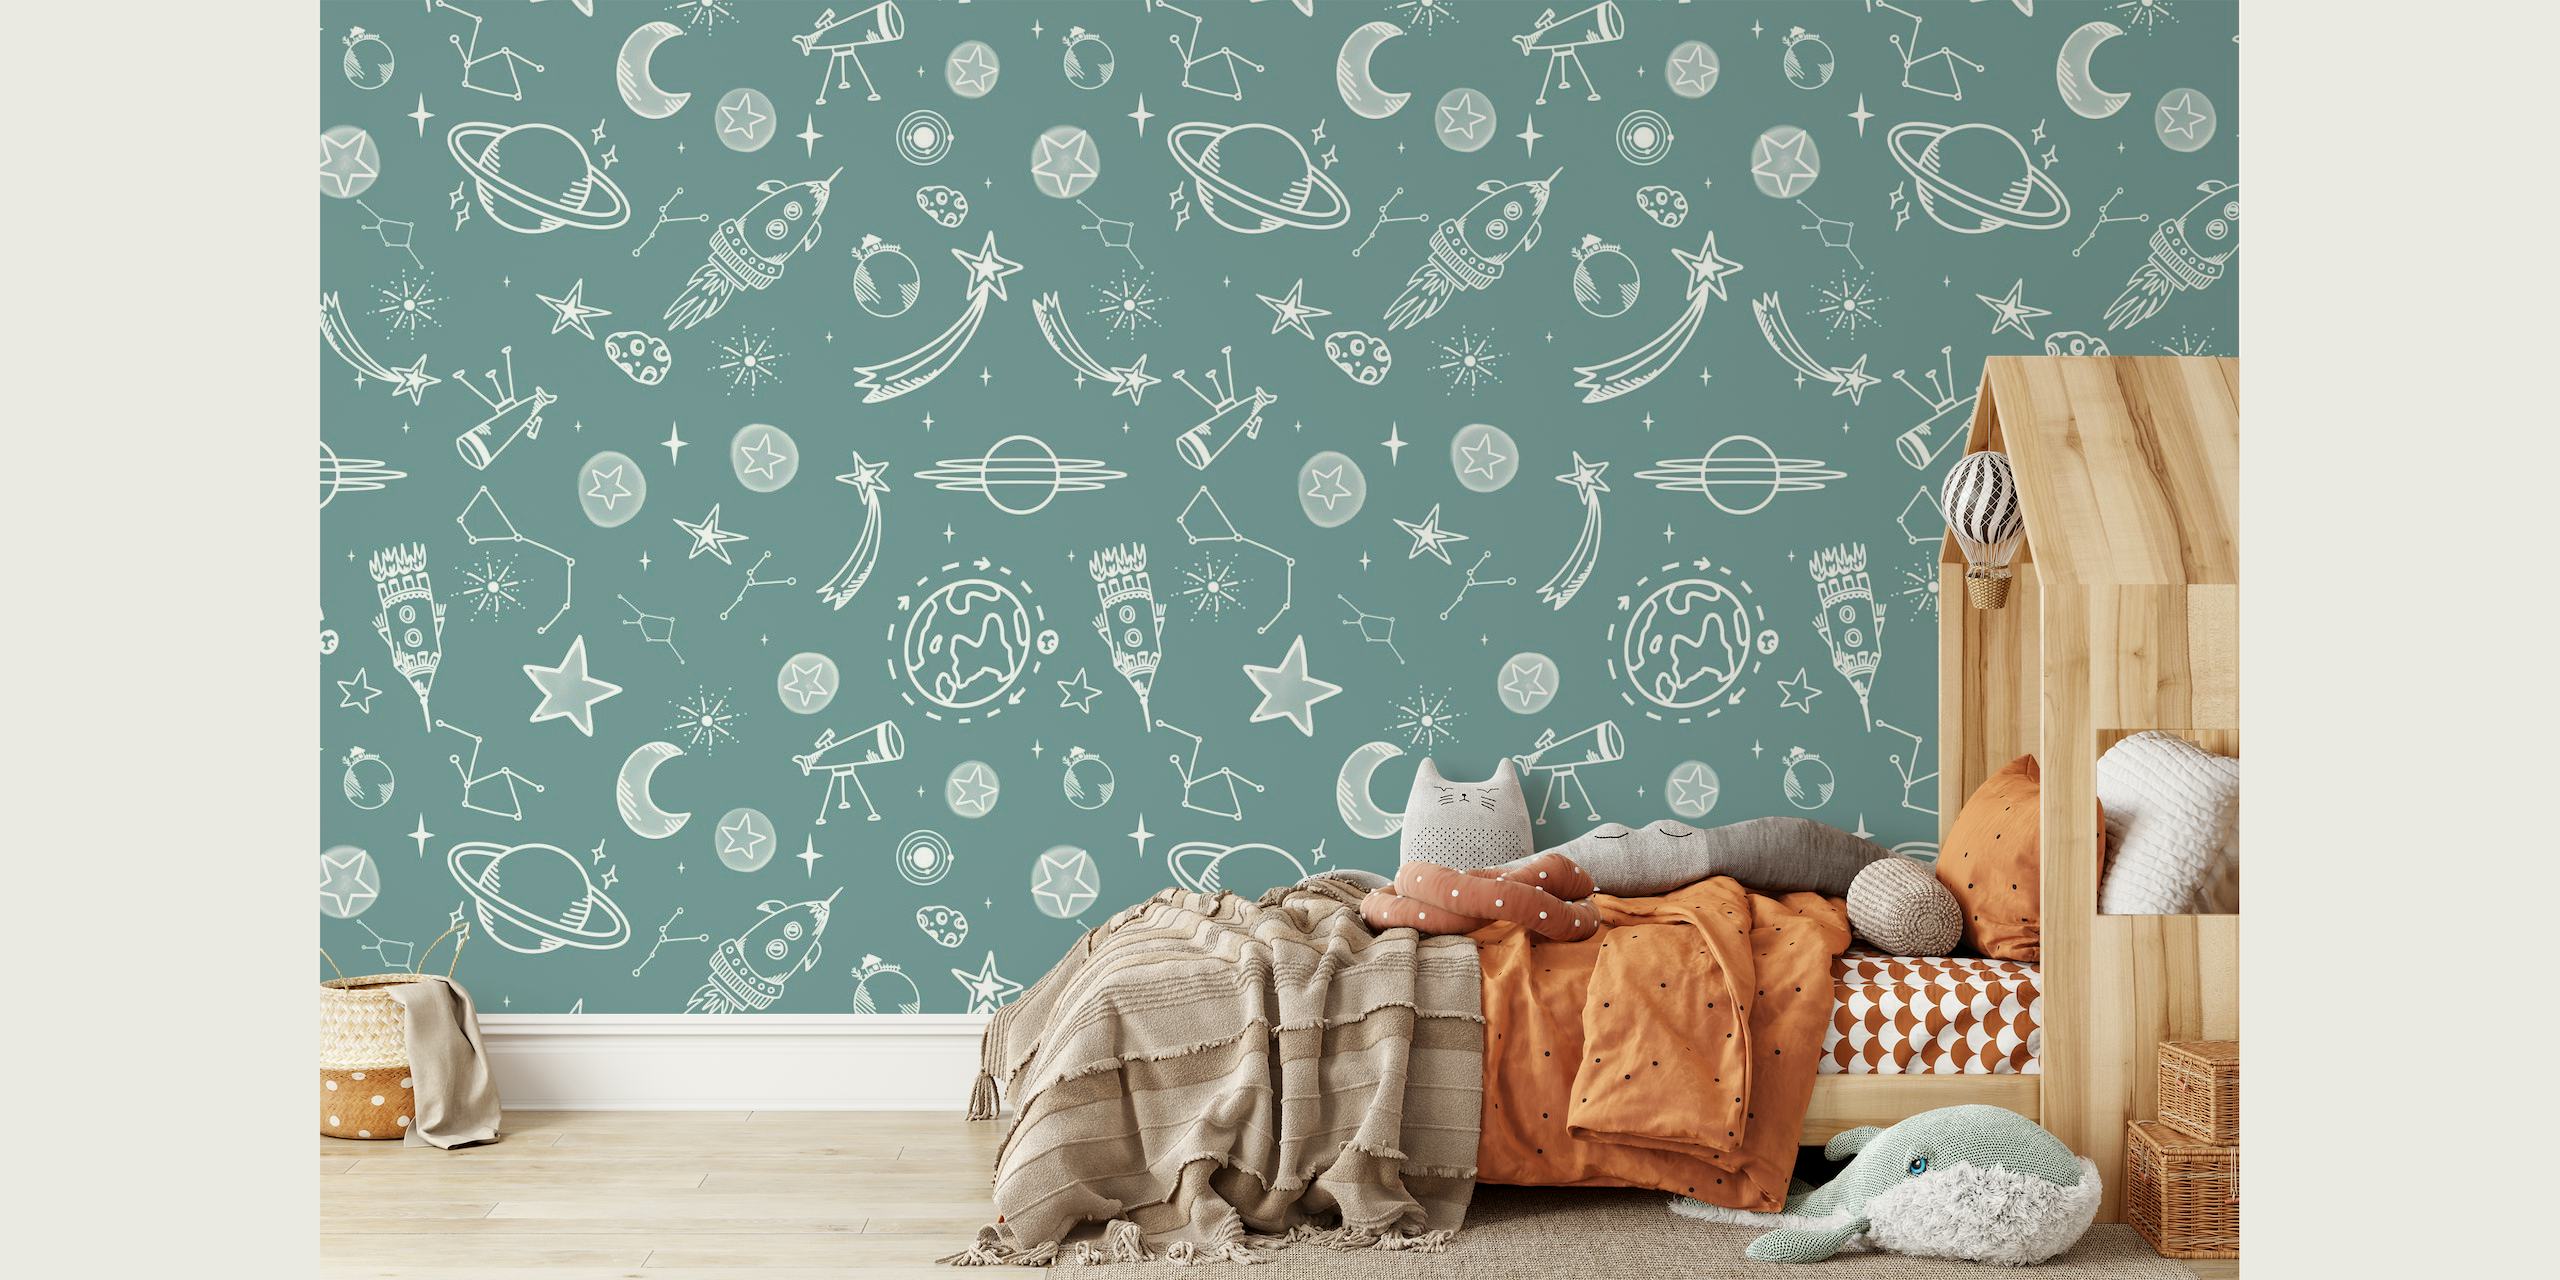 Space-themed wall mural with rockets and celestial bodies on grey background